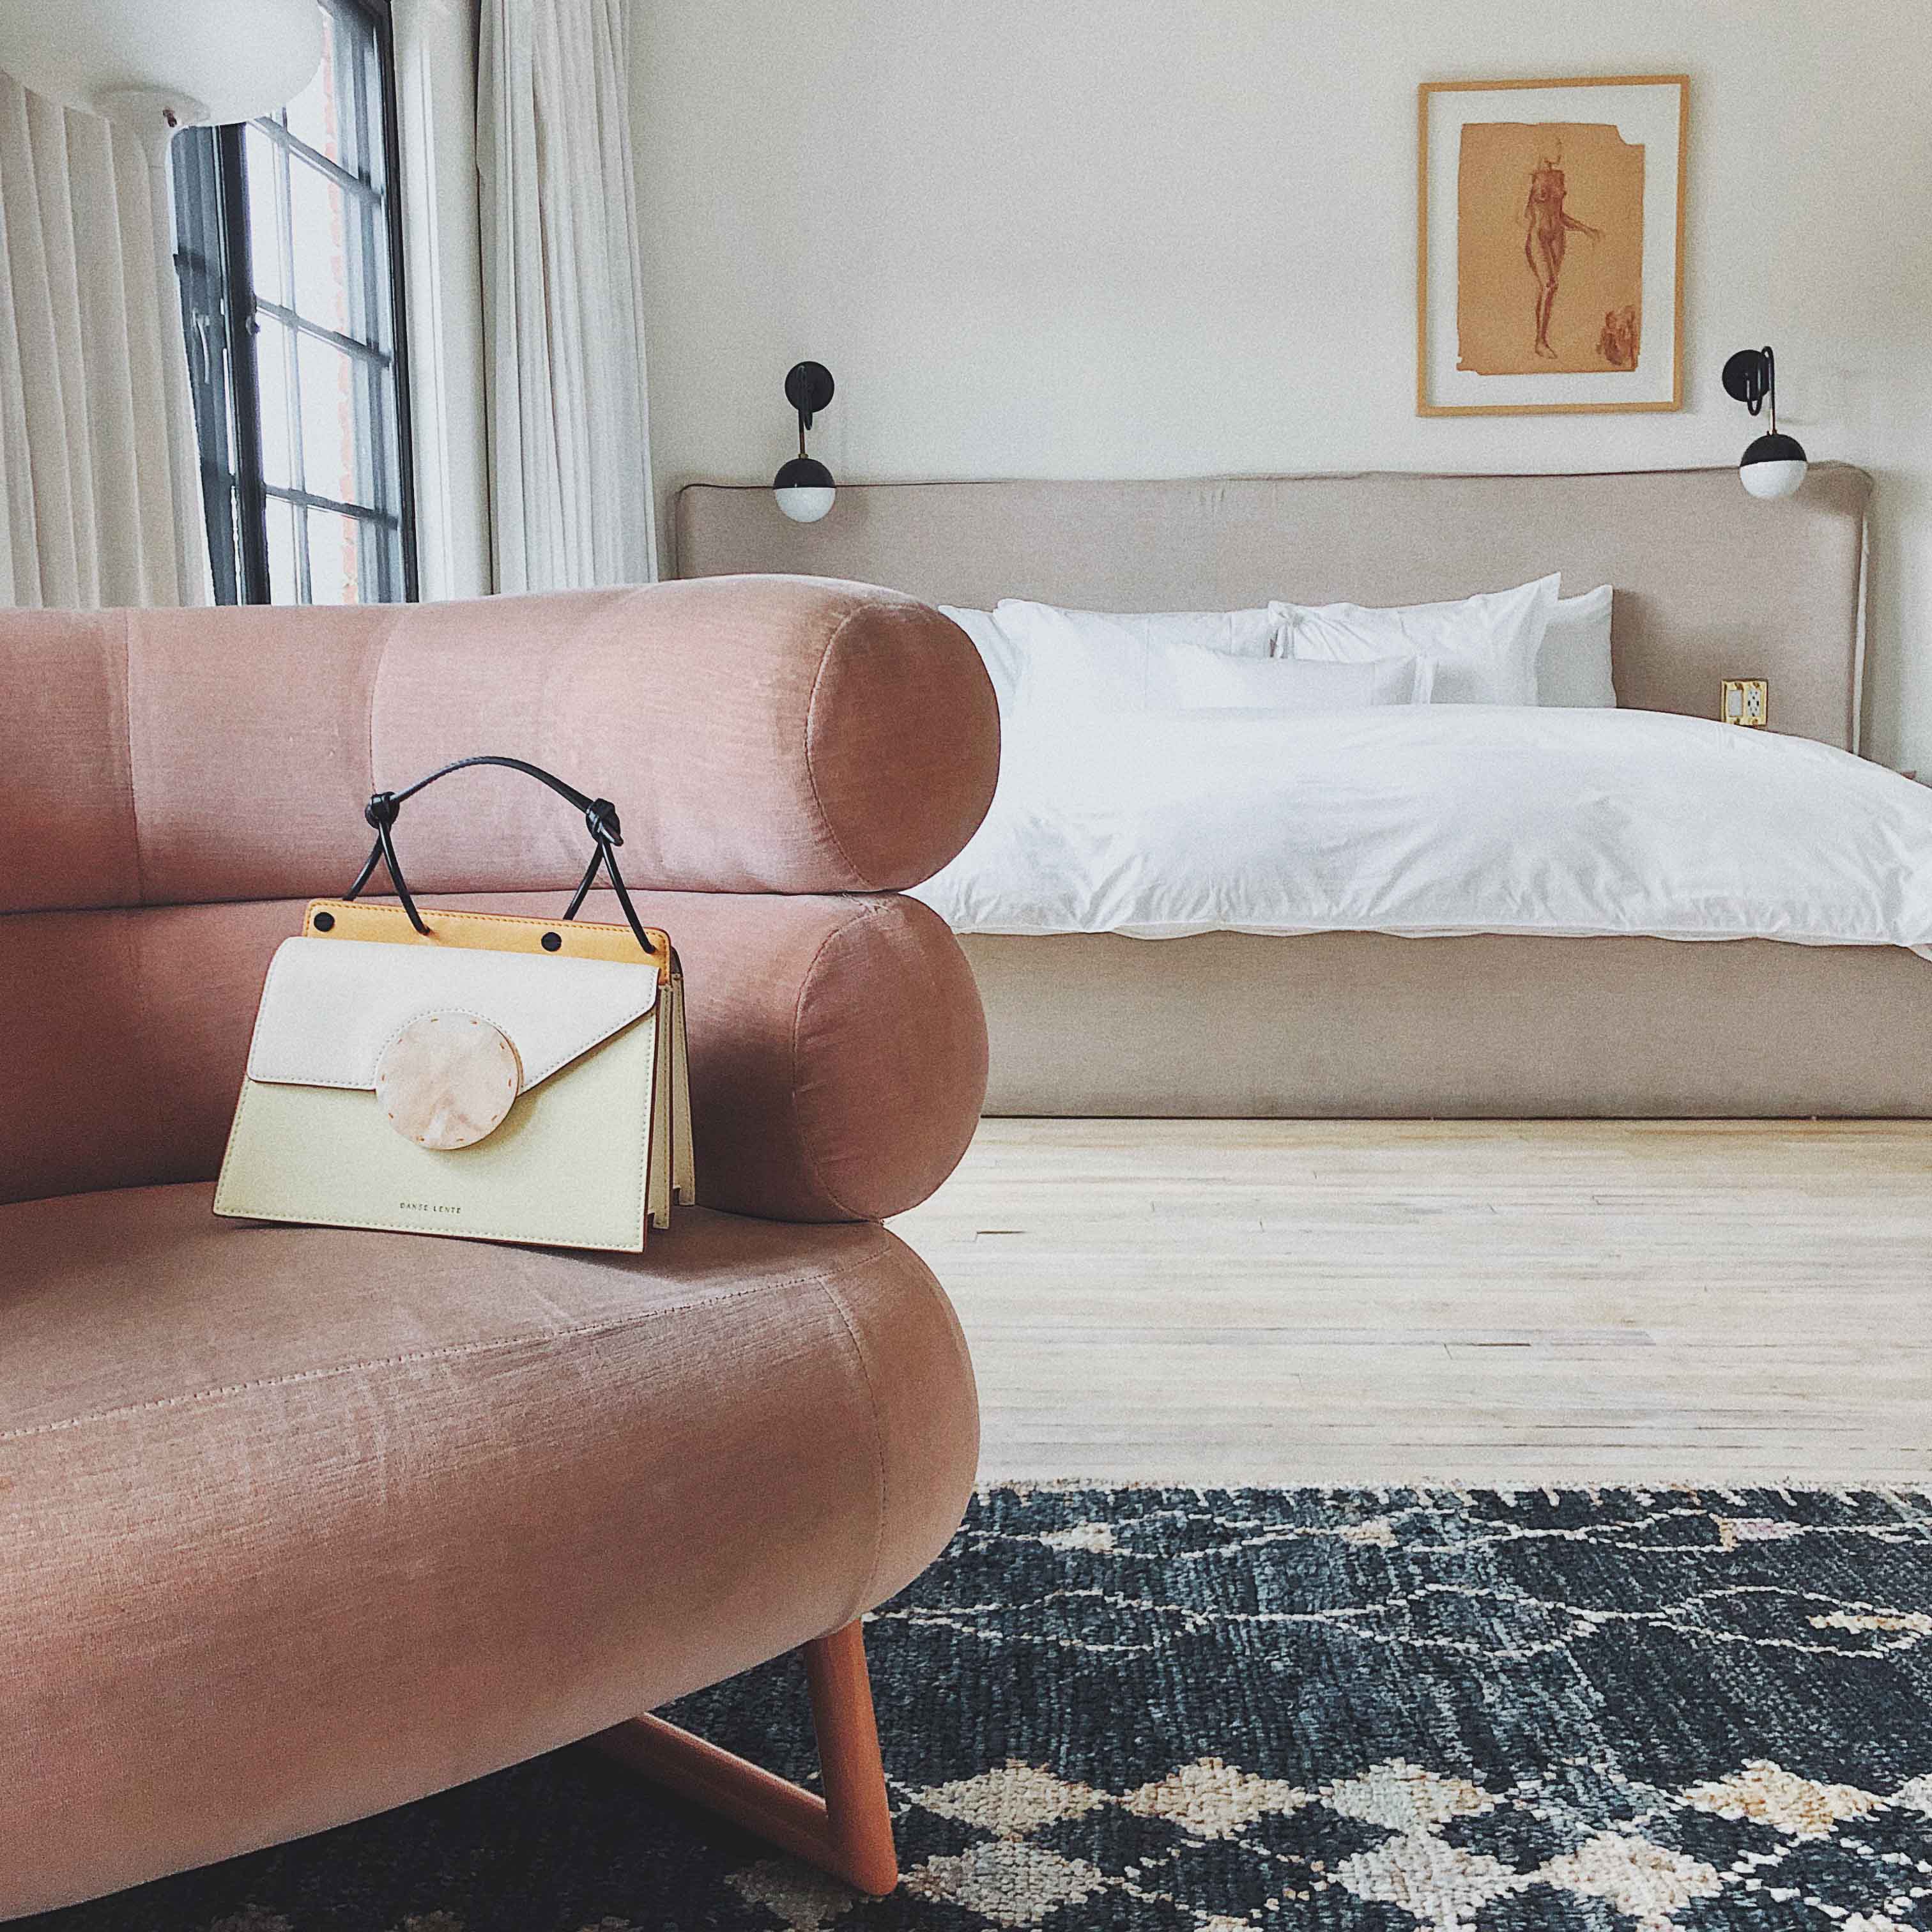 Discover the hidden gem Hotel Covell: a small luxury boutique hotel in Los Angeles. Parisian vibes and opulant rooms: Hotel Covell is a luxury independent hotel for short / long term stay. Review by French Fashion Blogger Julia Comil. Pink velvet chair and bag by danse lente